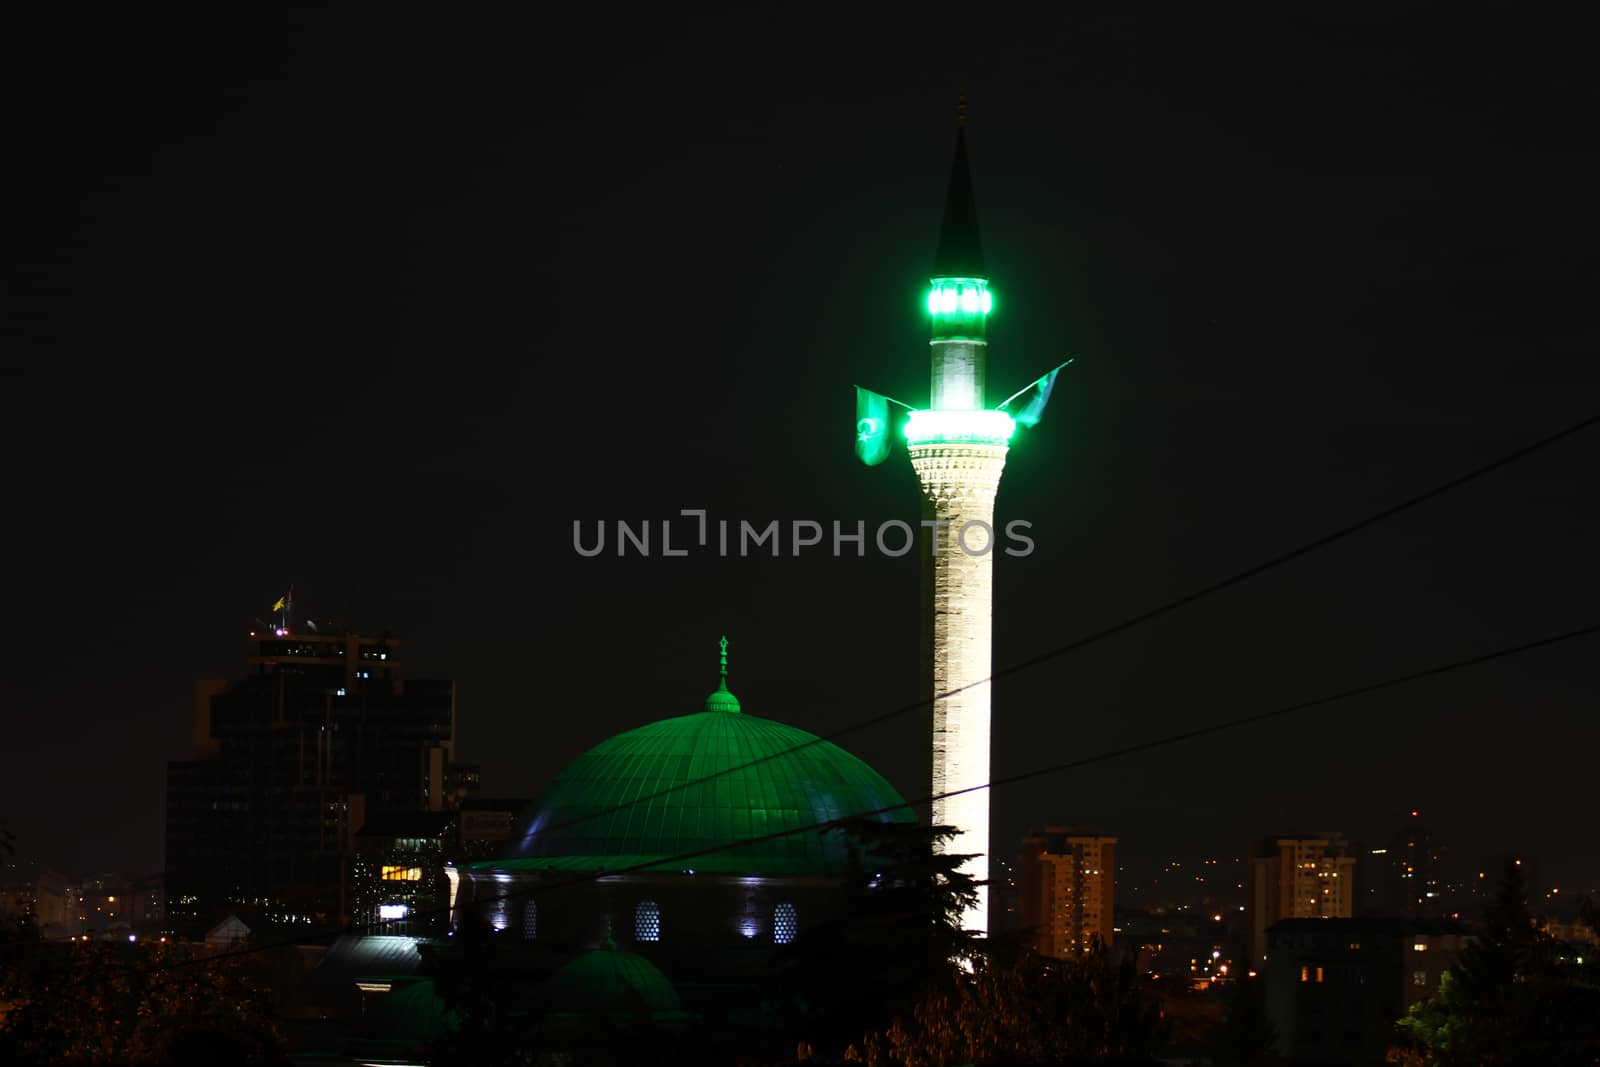 mosque at night with green light and flag